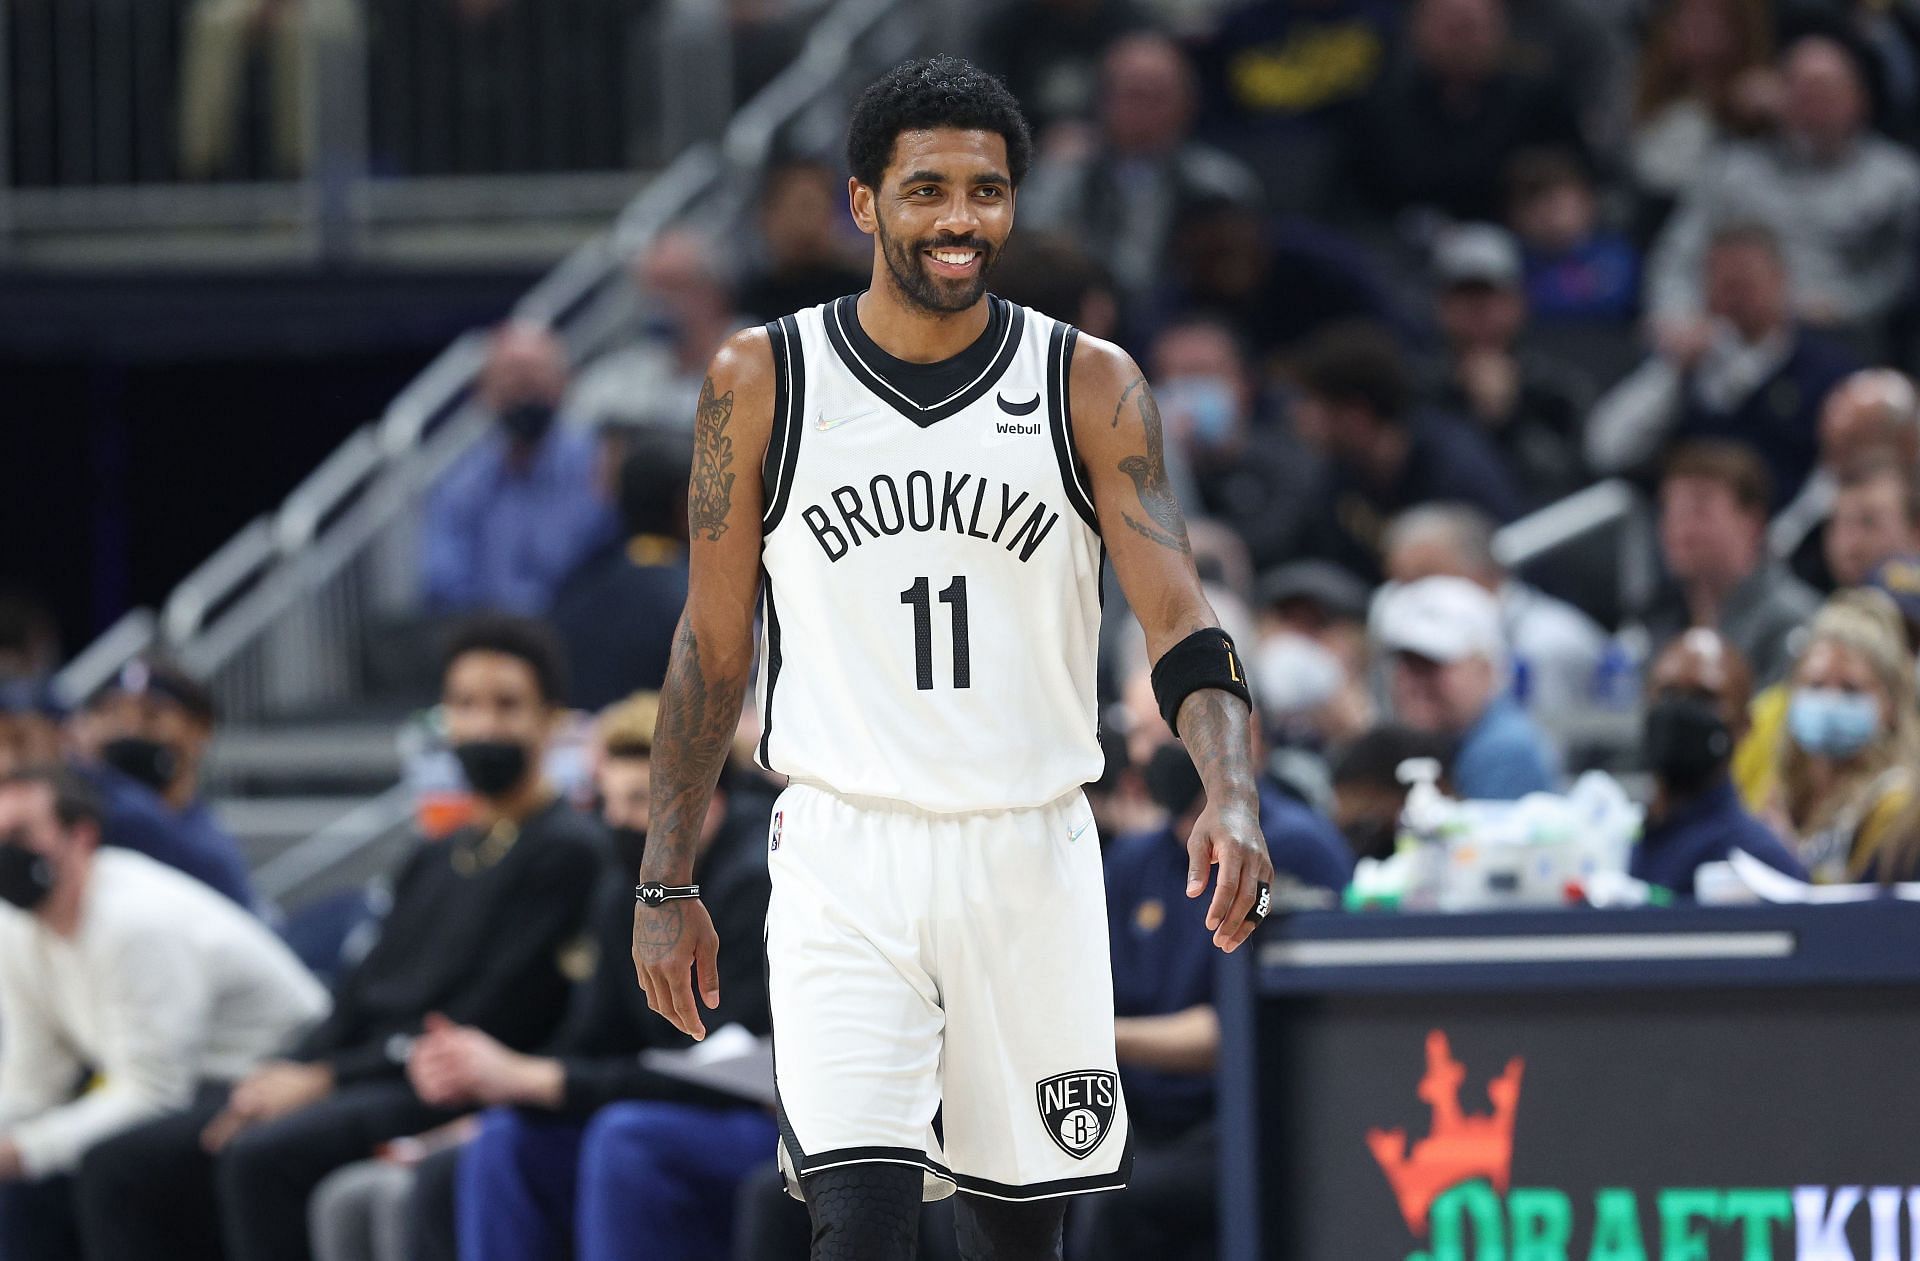 Kyrie Irving #11of the Brooklyn Nets made his return against the Indiana Pacers.